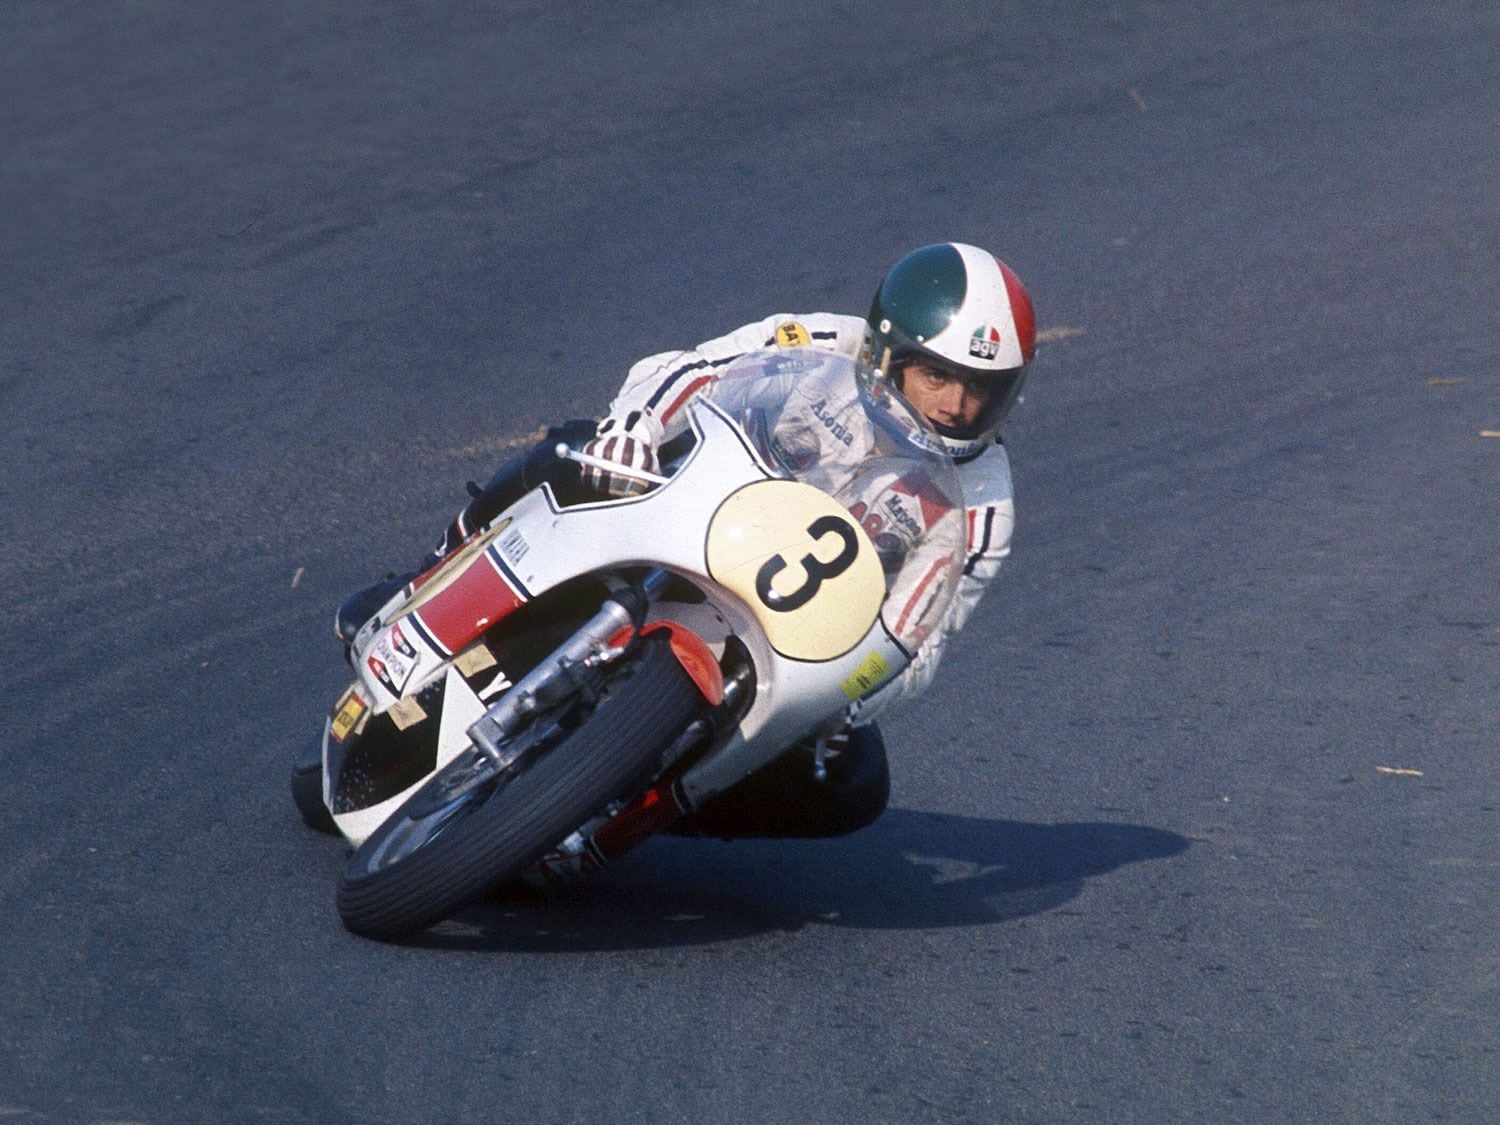 Agostini’s last two world championships came on Yamaha two-strokes.